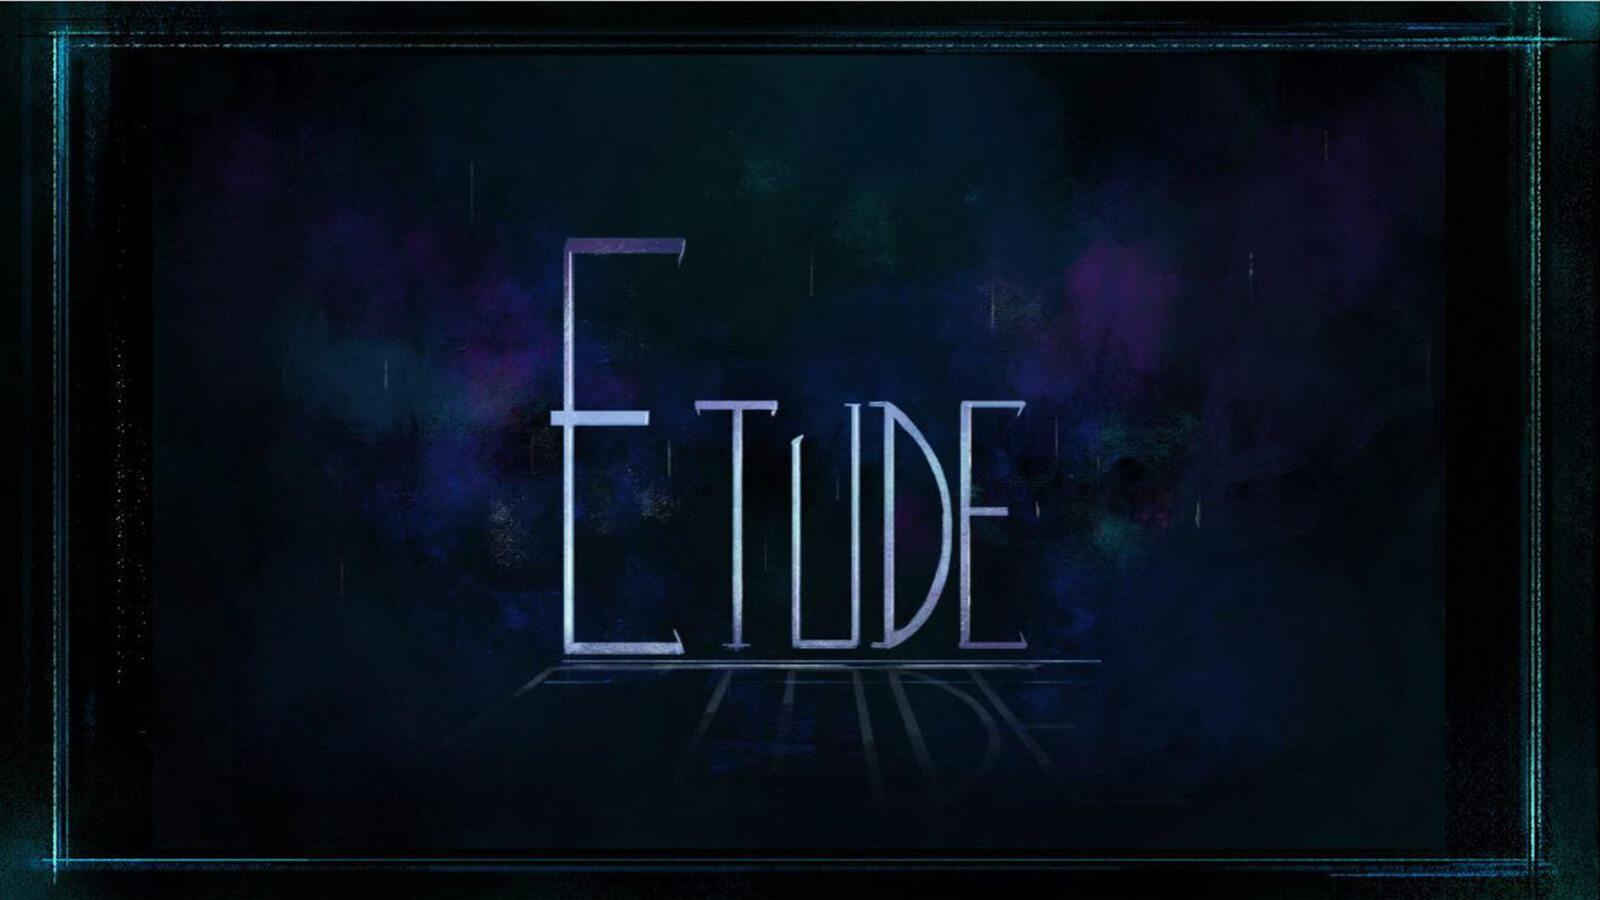 The title card for Etude.